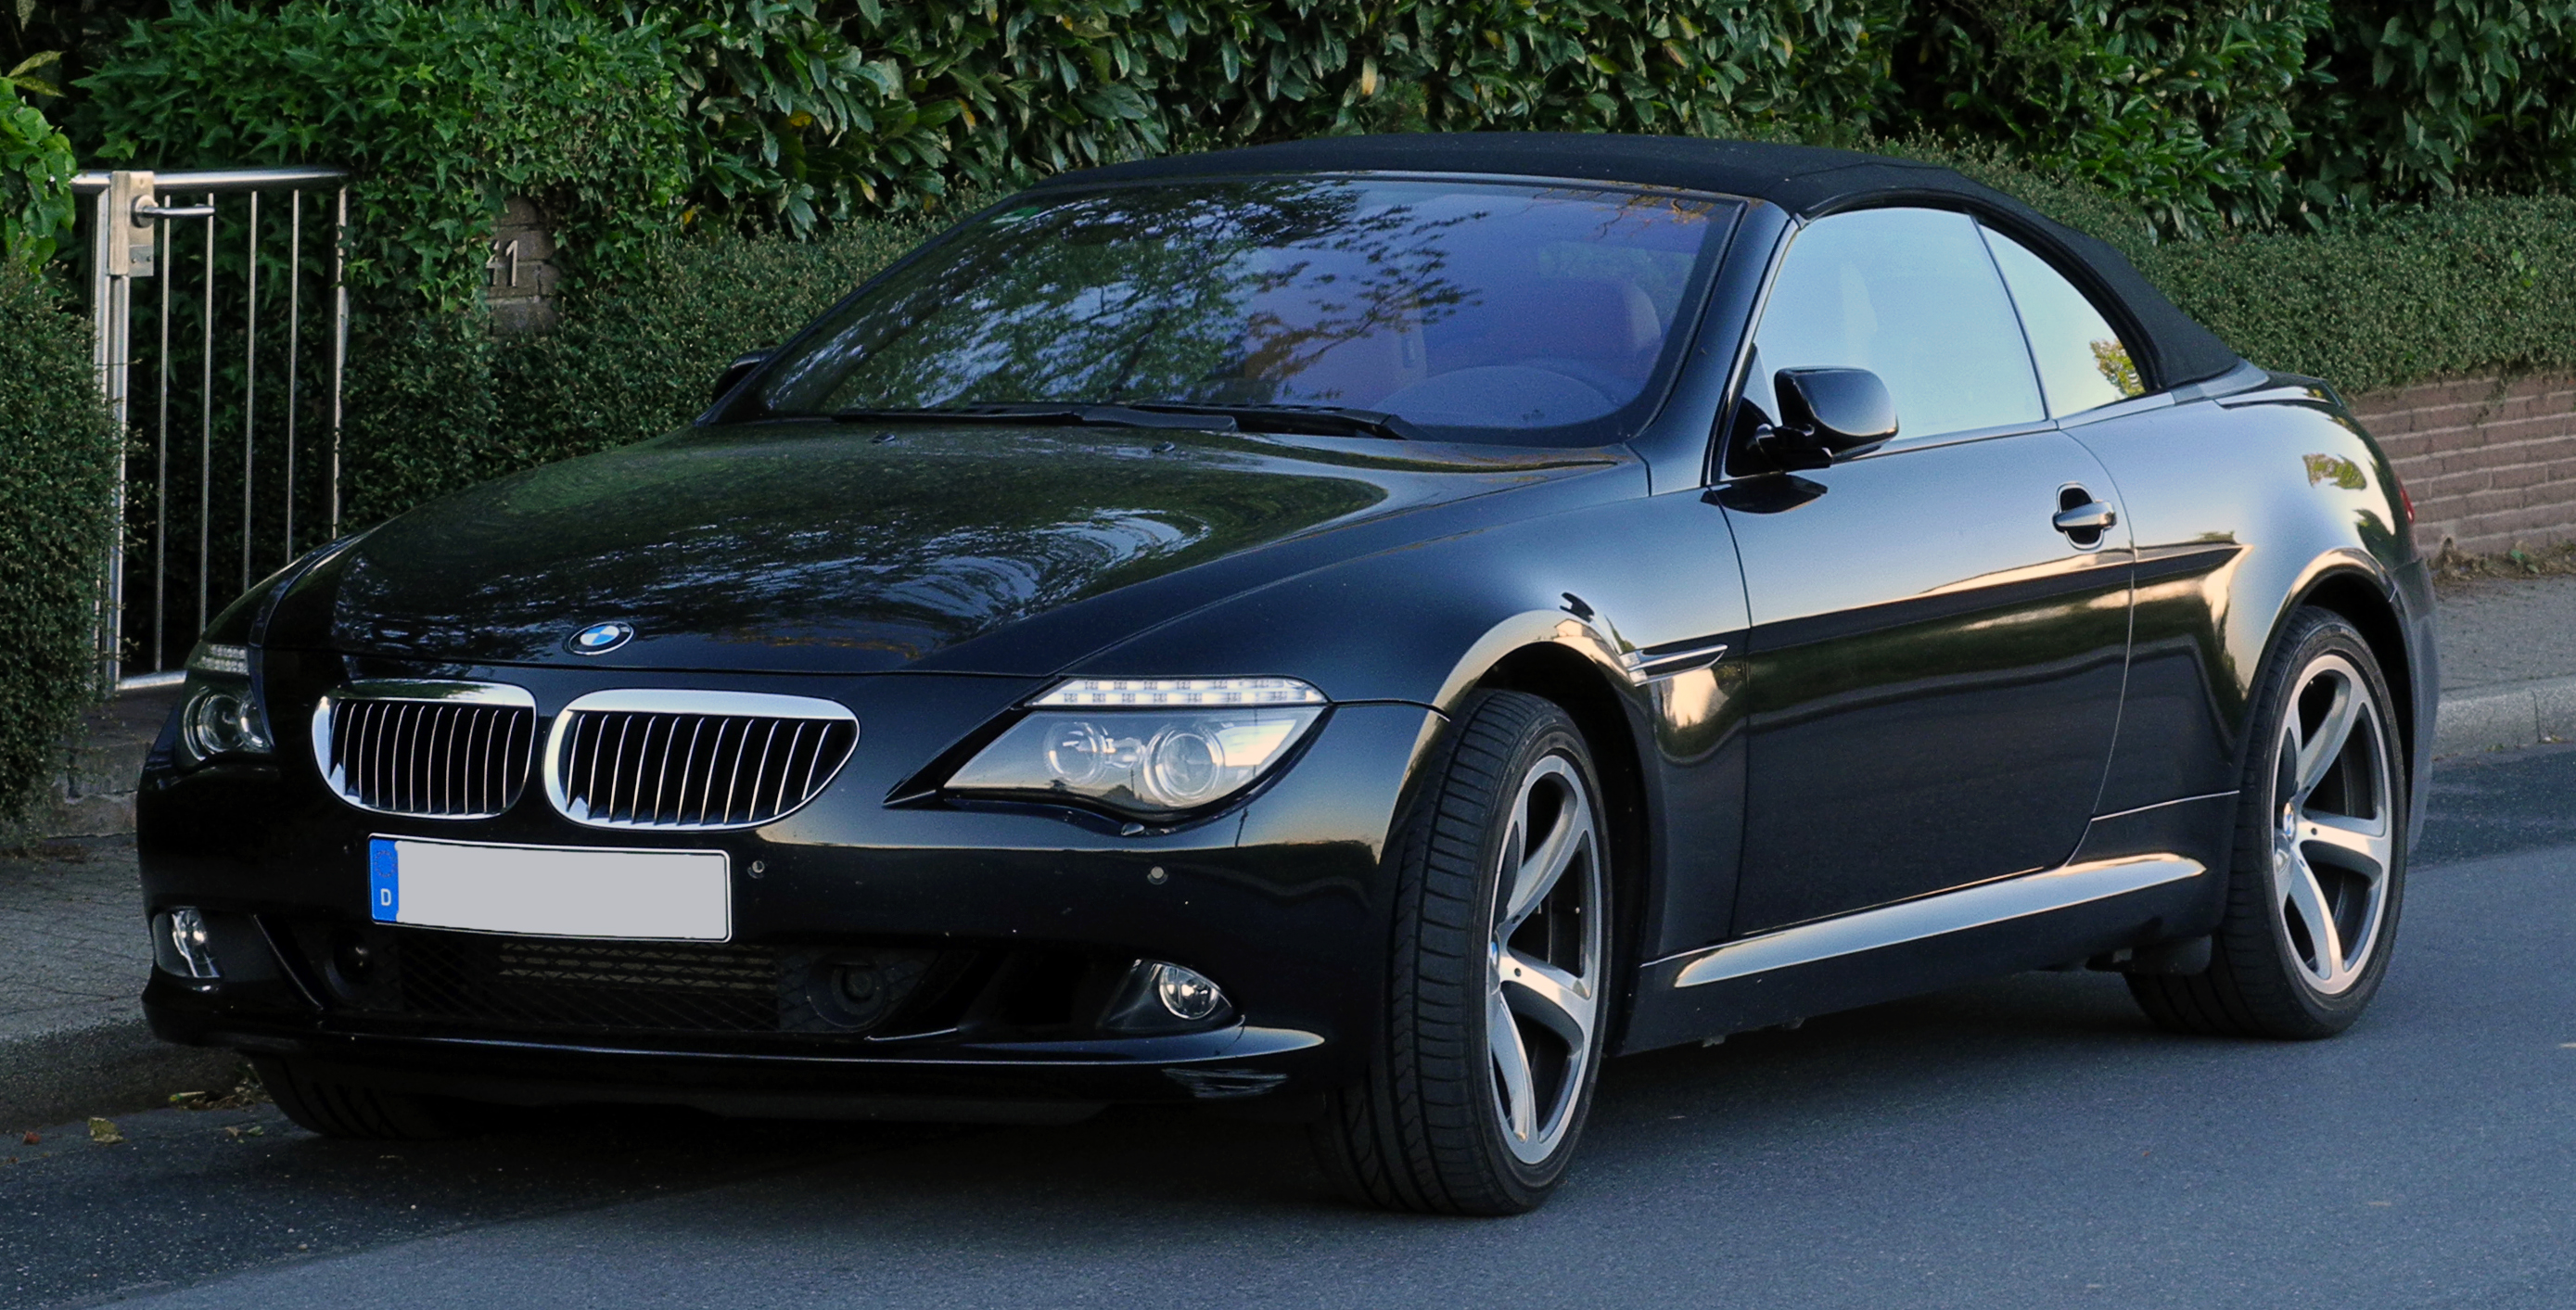 BMW 650i. View Download Wallpaper. 2778x1413. Comments